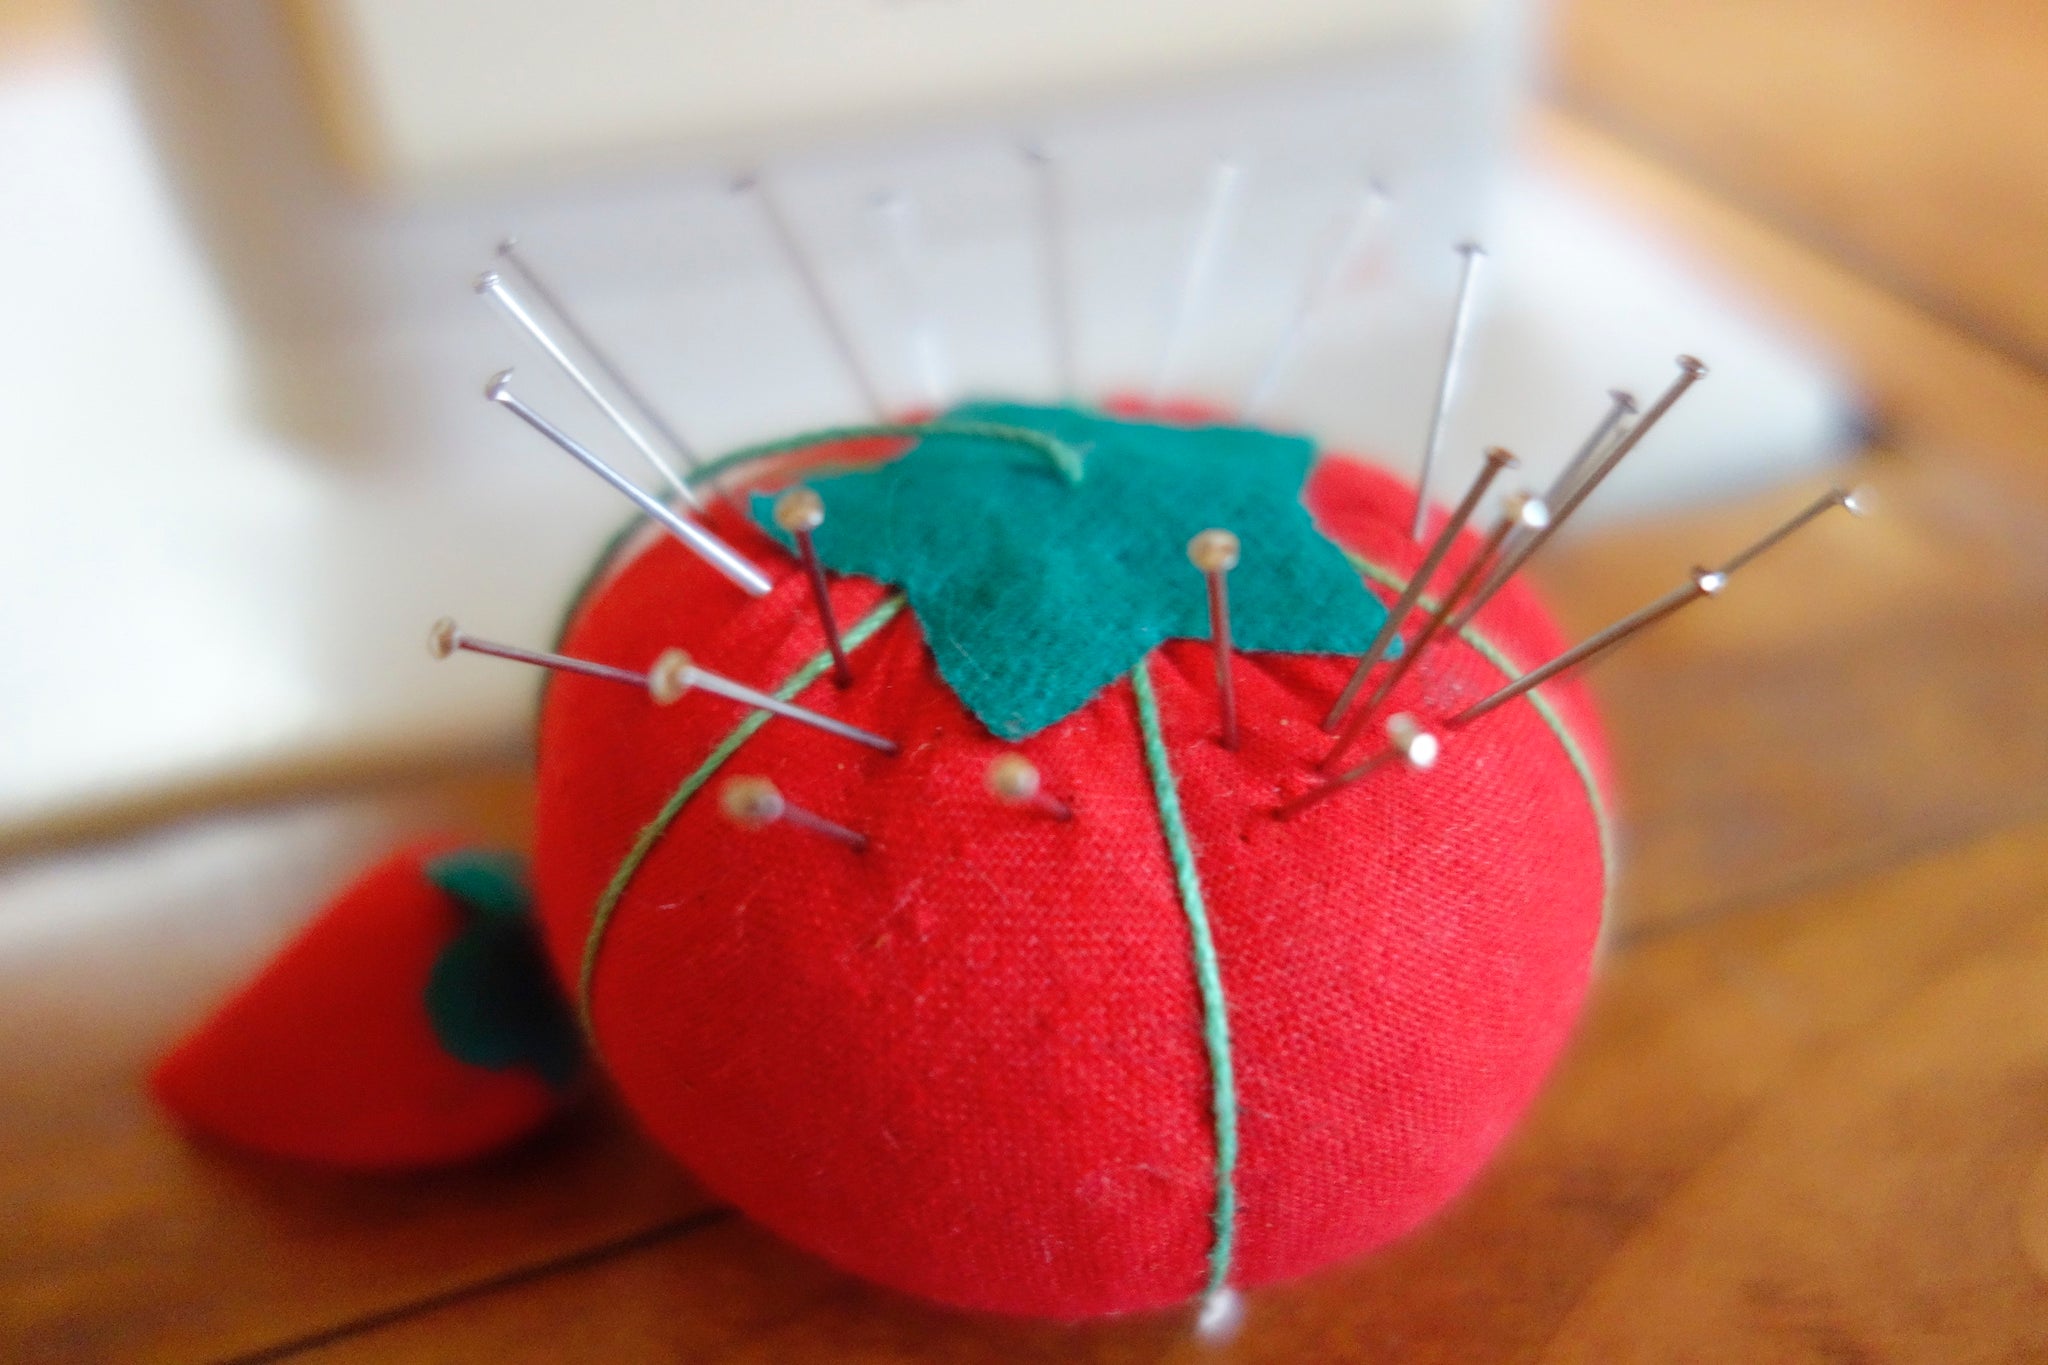 Glass Head Sewing Pins - How Did You Make This?